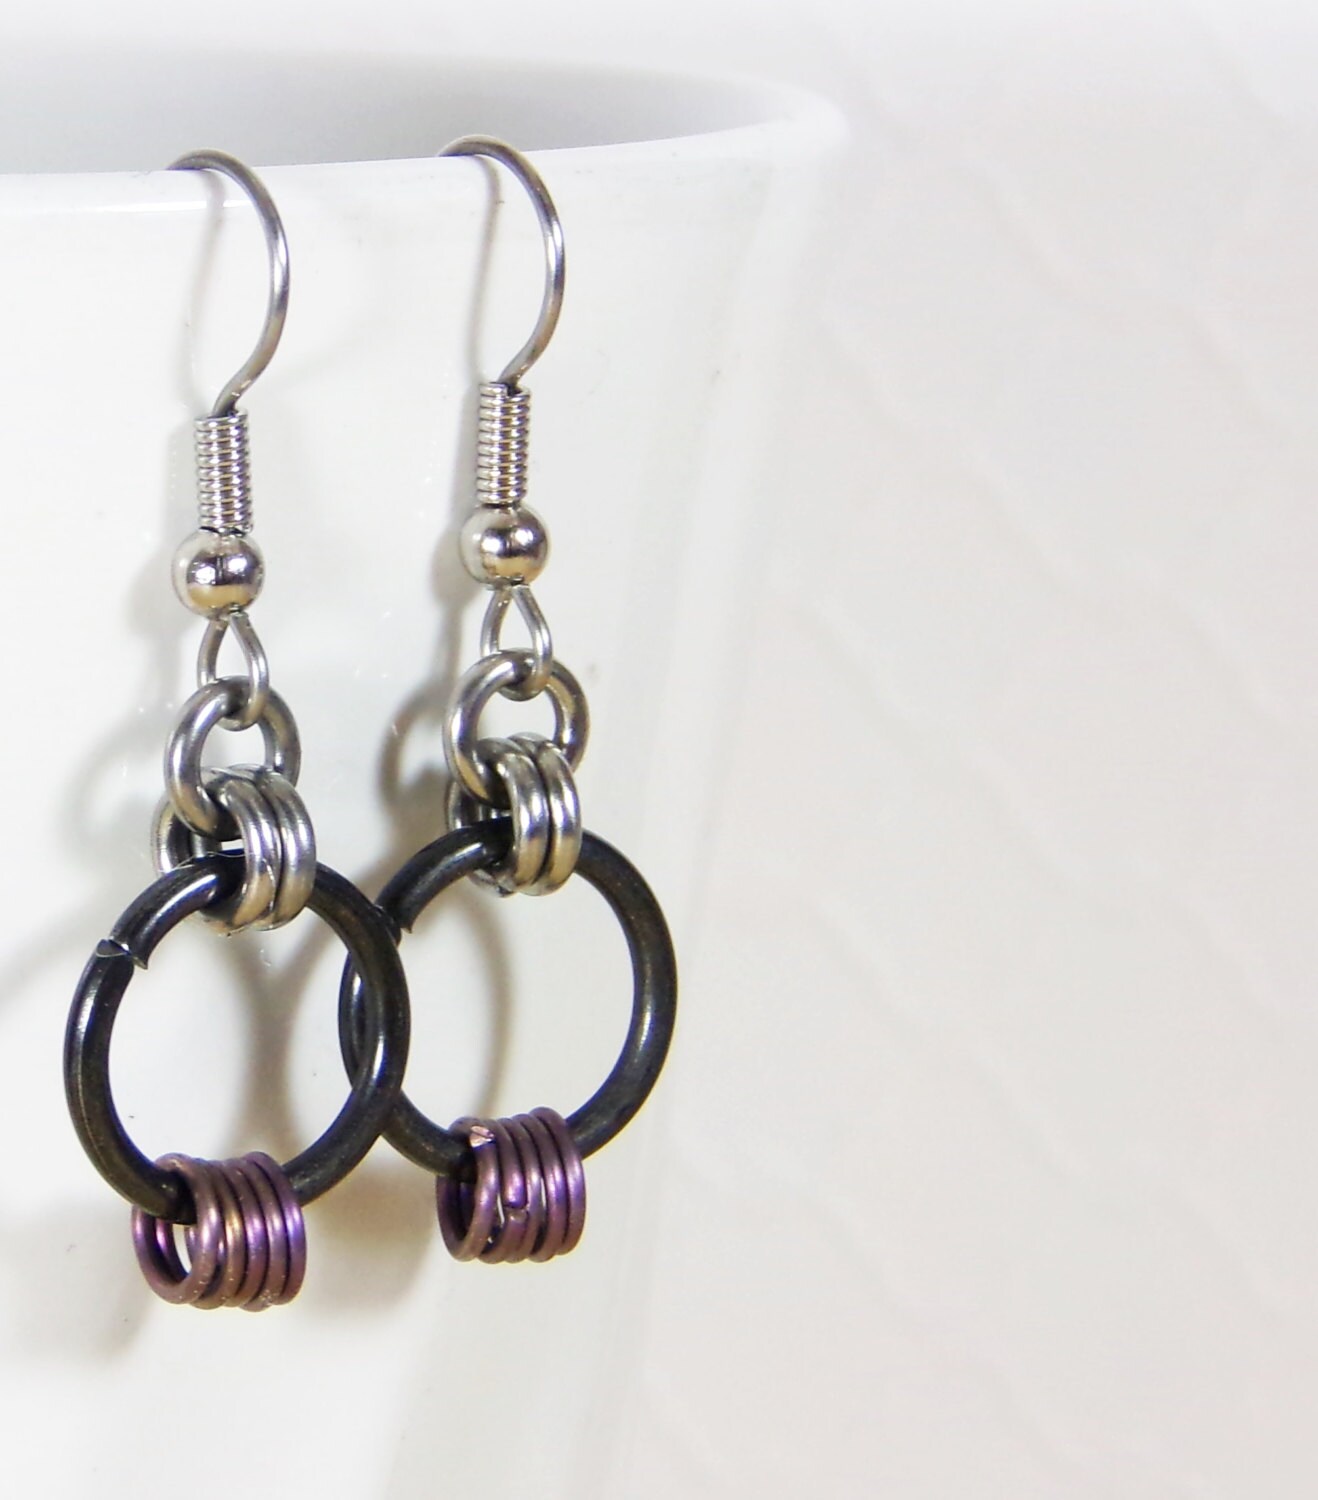 Stainless Steel Chainmaille Earrings- Rocker Earrings - Simple Chainmaille earrings - Go to Earrings - Chainmaille Jewelry